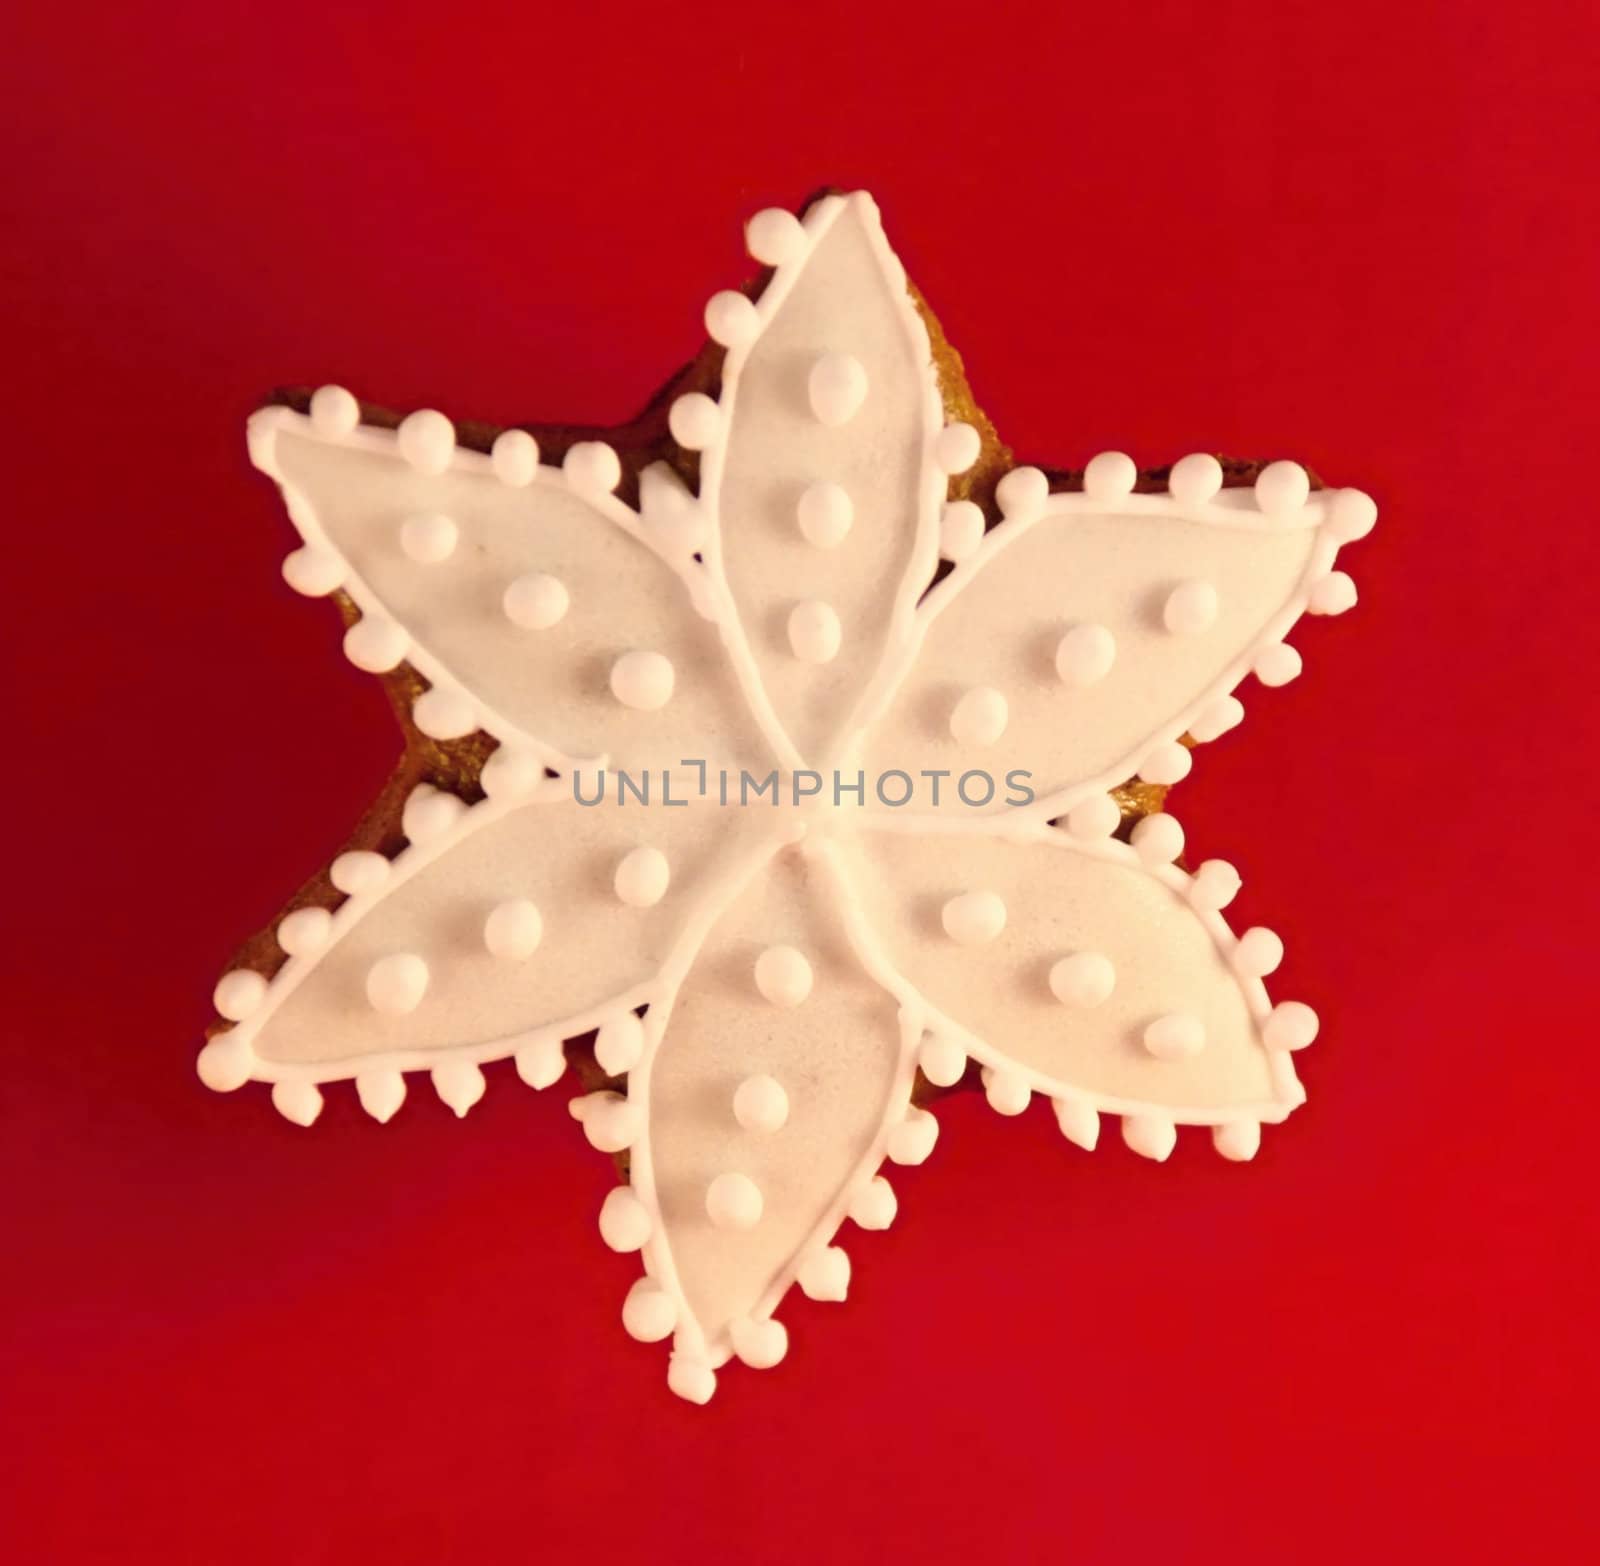 Christmas star made by gingerbread aranged on red background